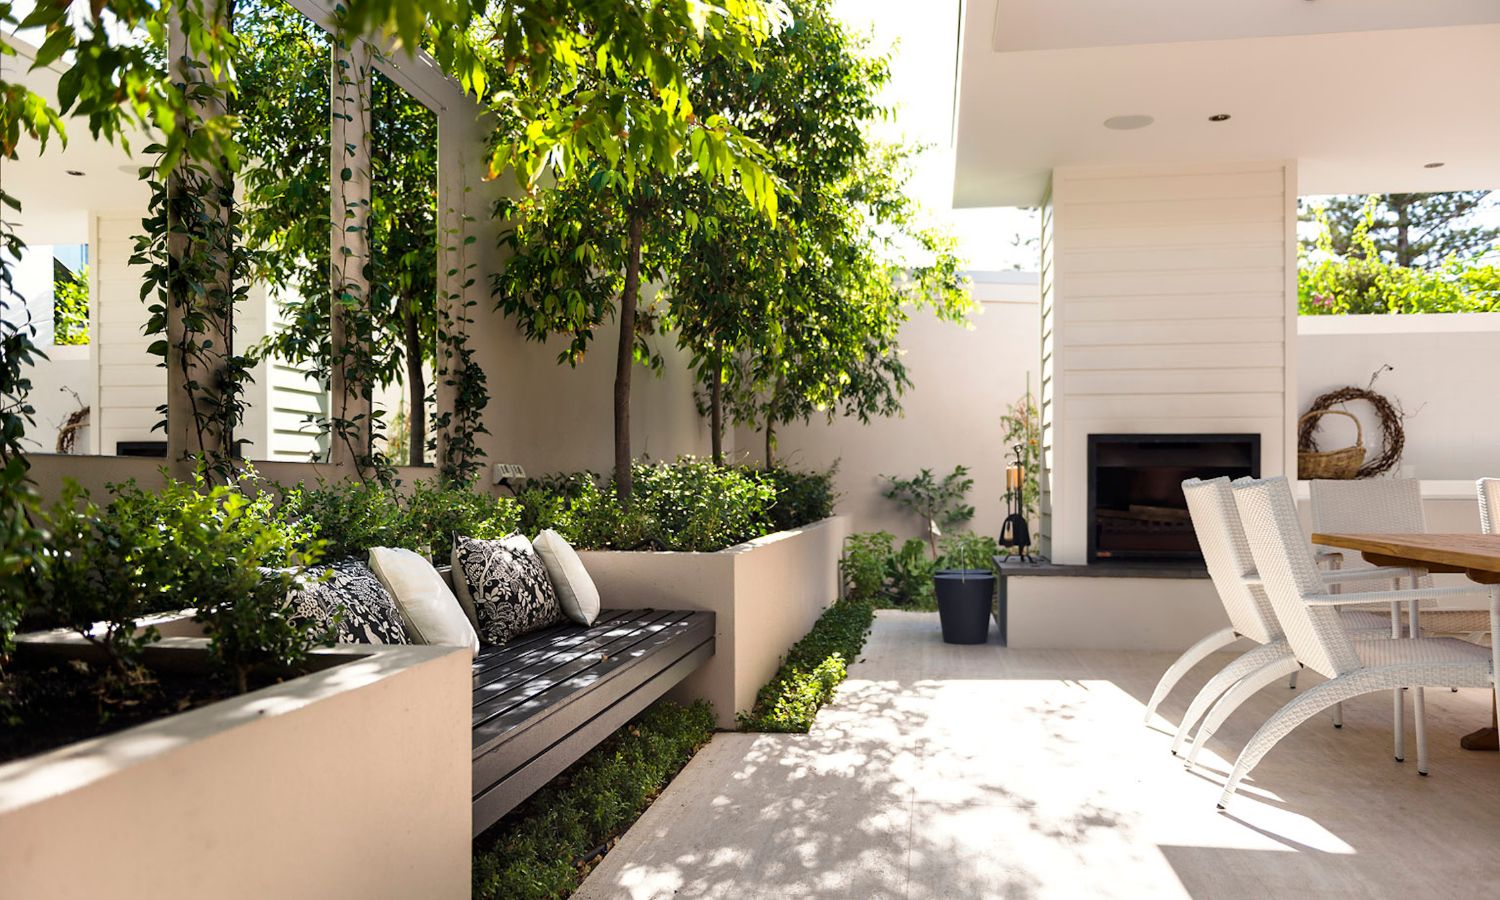 Covered outdoor terrace